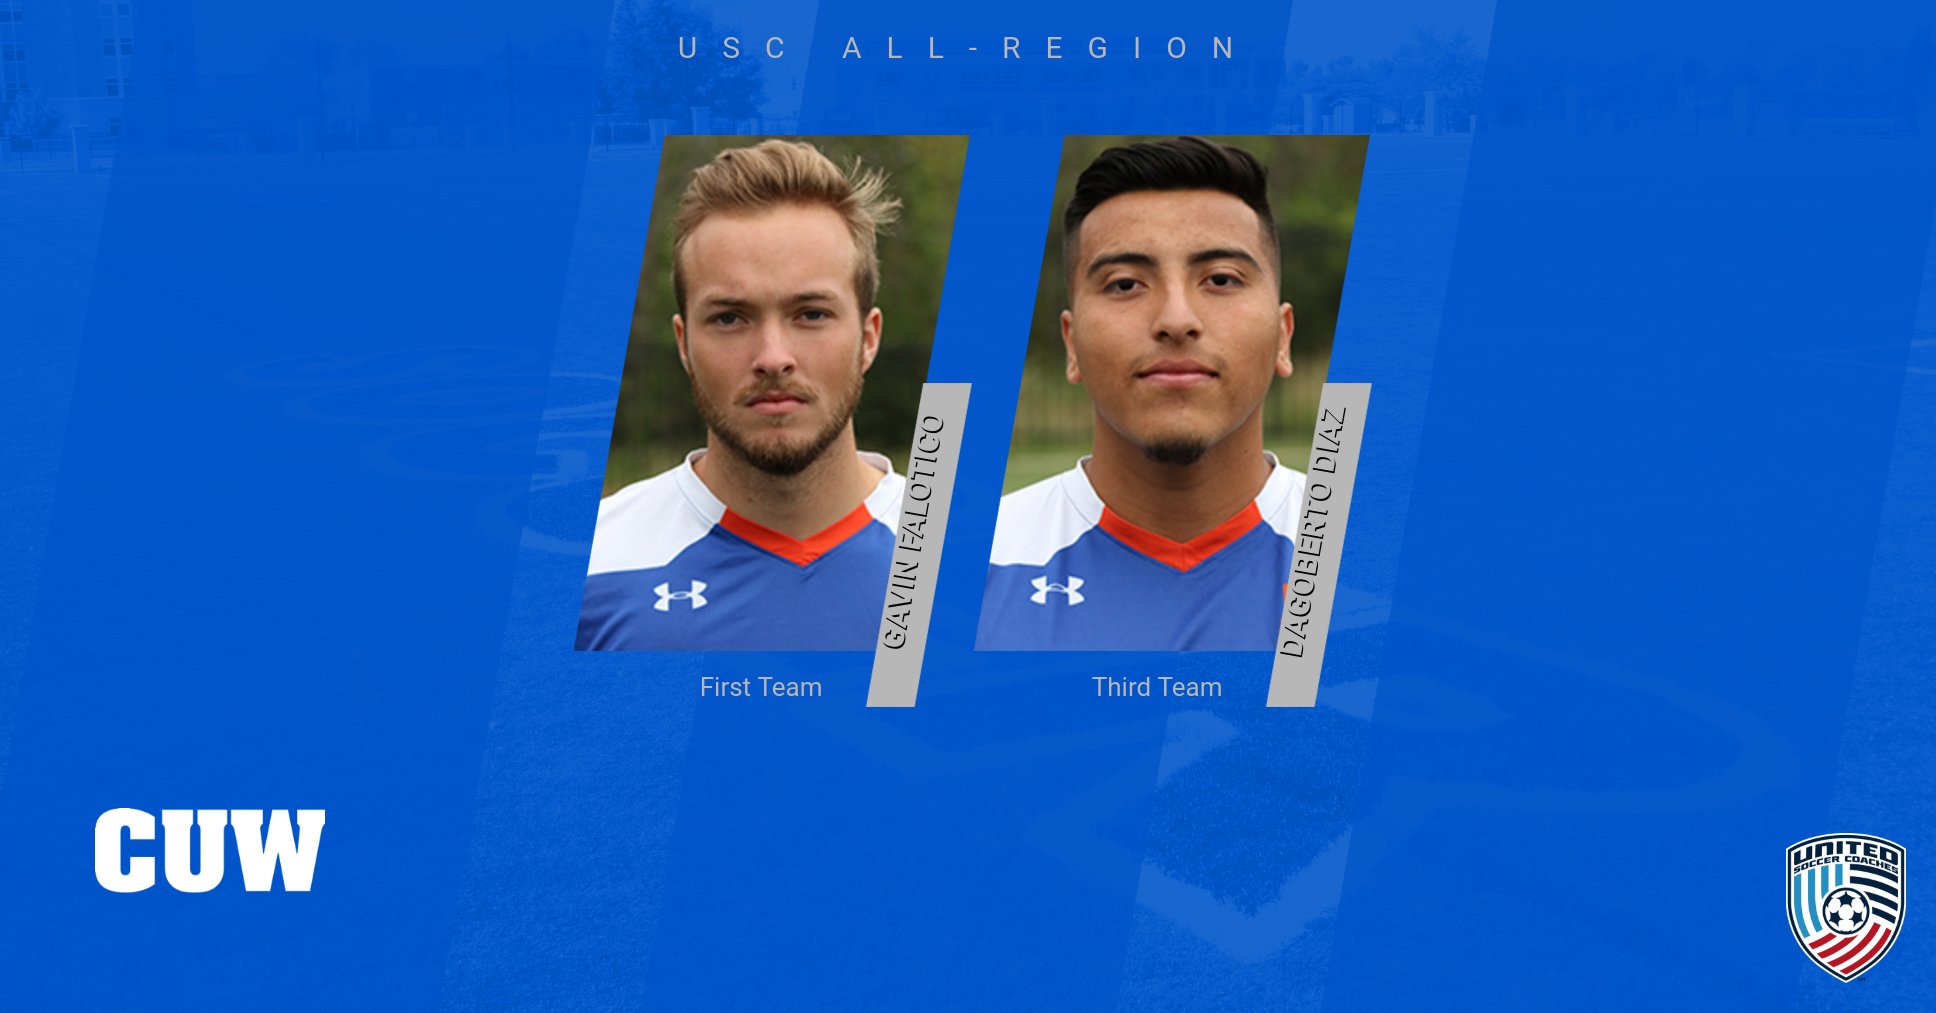 Men’s Soccer duo claims USC All-Region honors